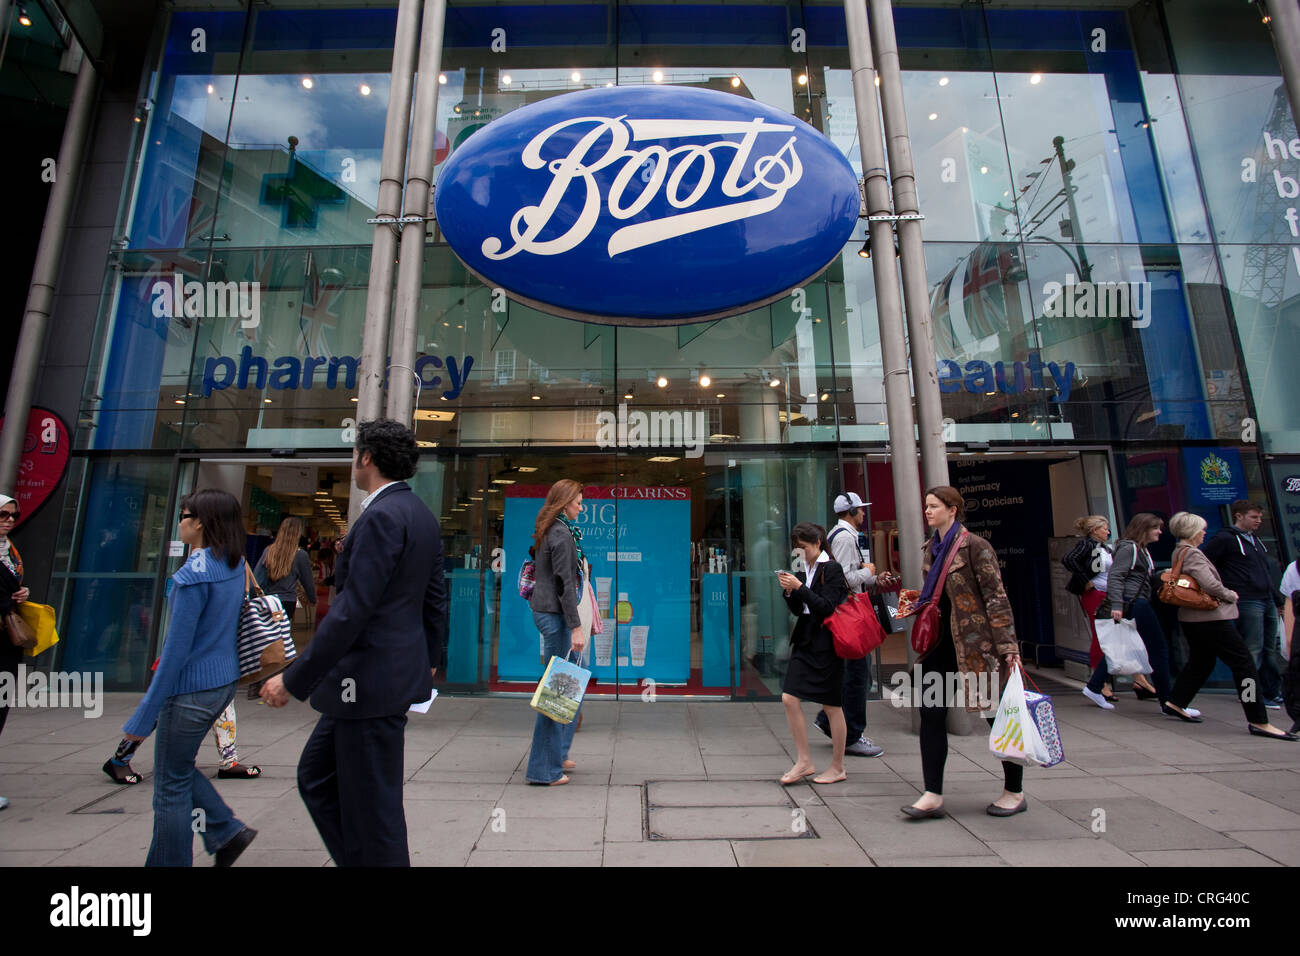 Boots pharmacy, Oxford Street, London, United Kingdom Banque D'Images